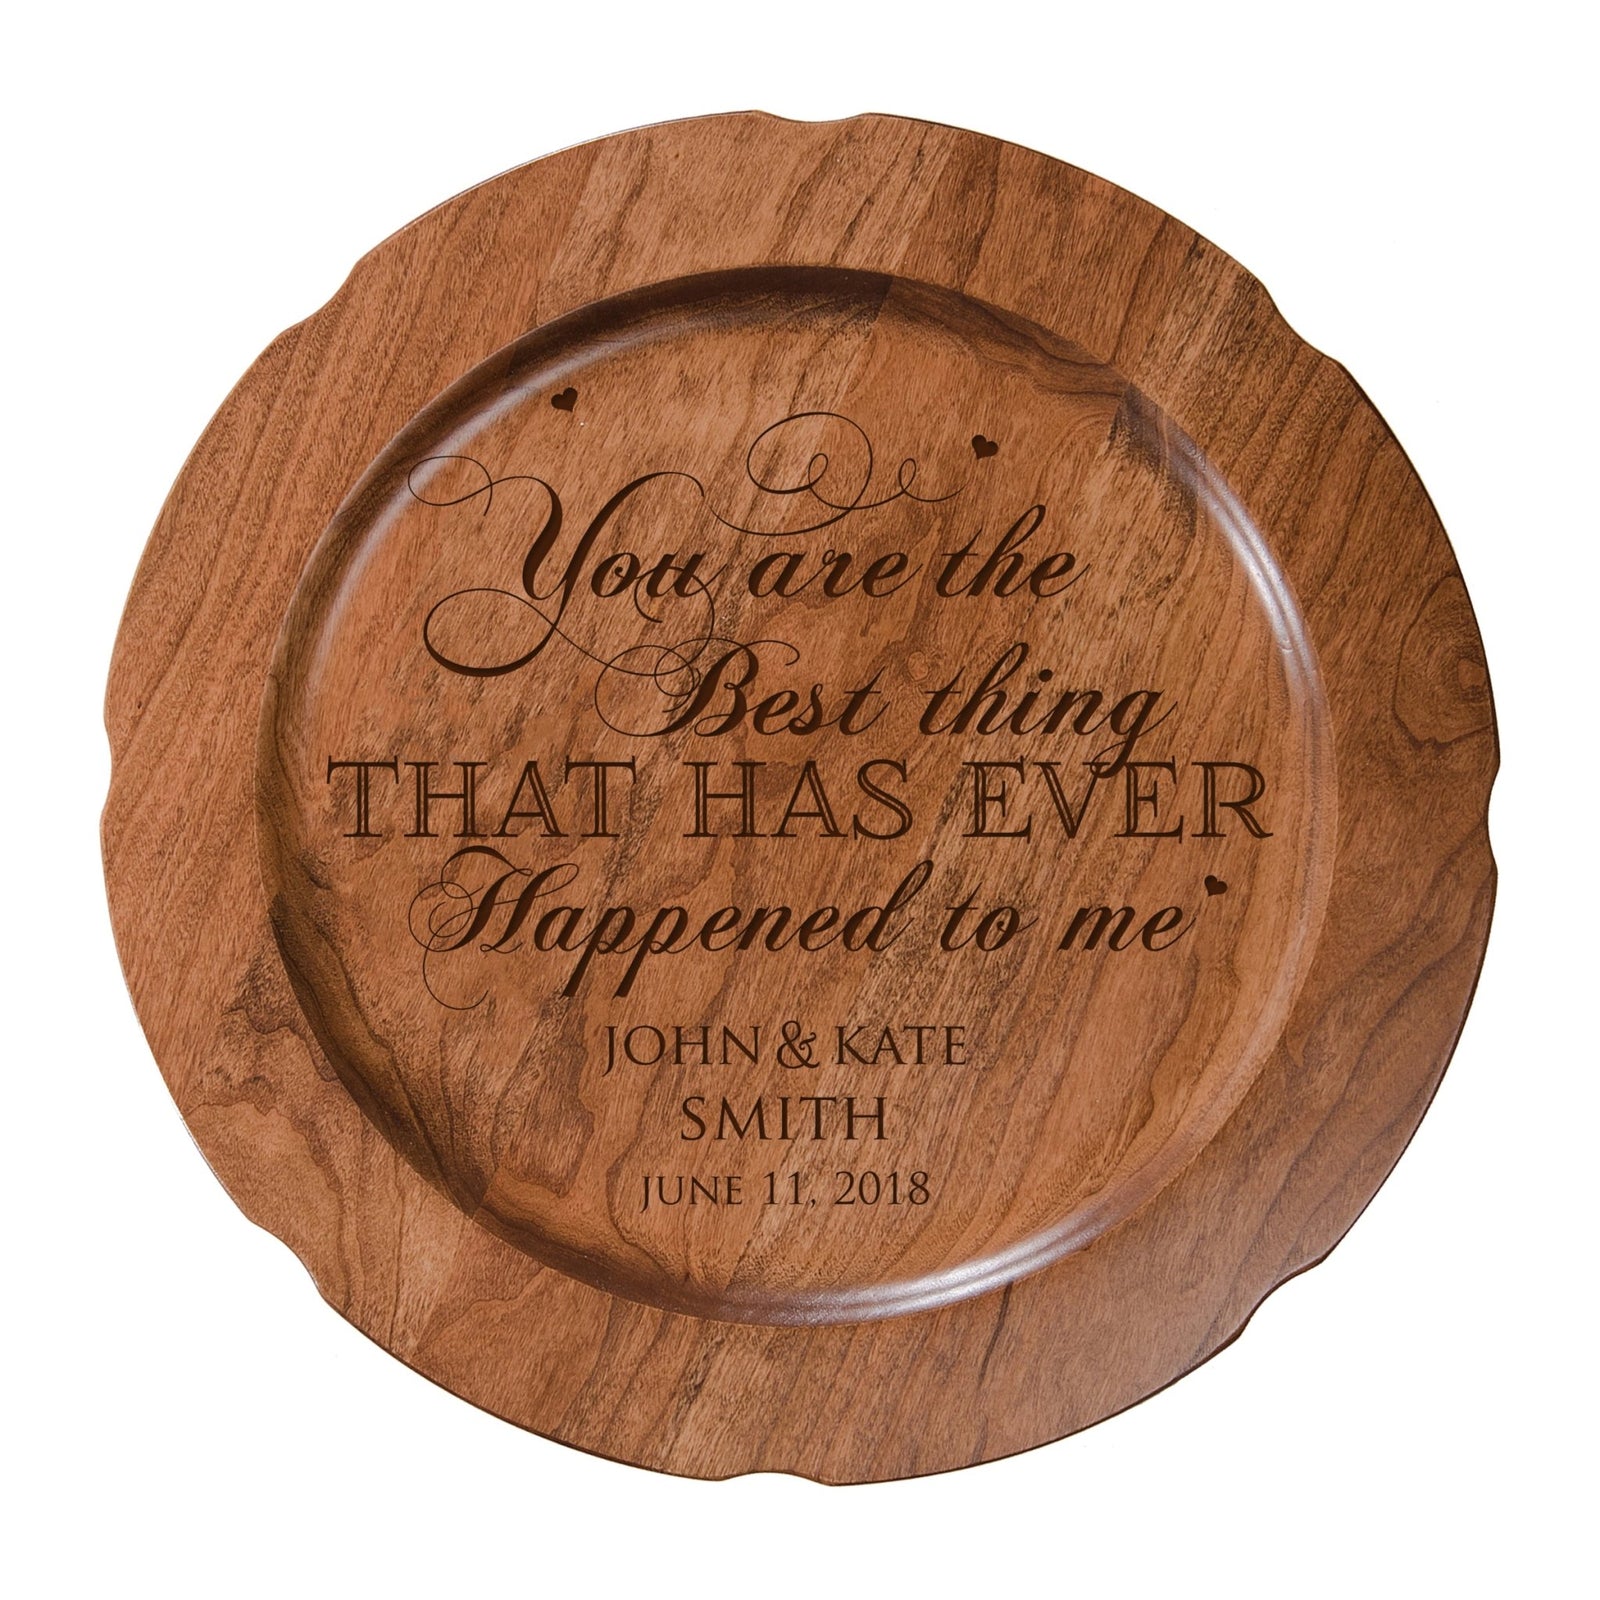 Personalized Inspirational Plates With Quotes - You Are - LifeSong Milestones